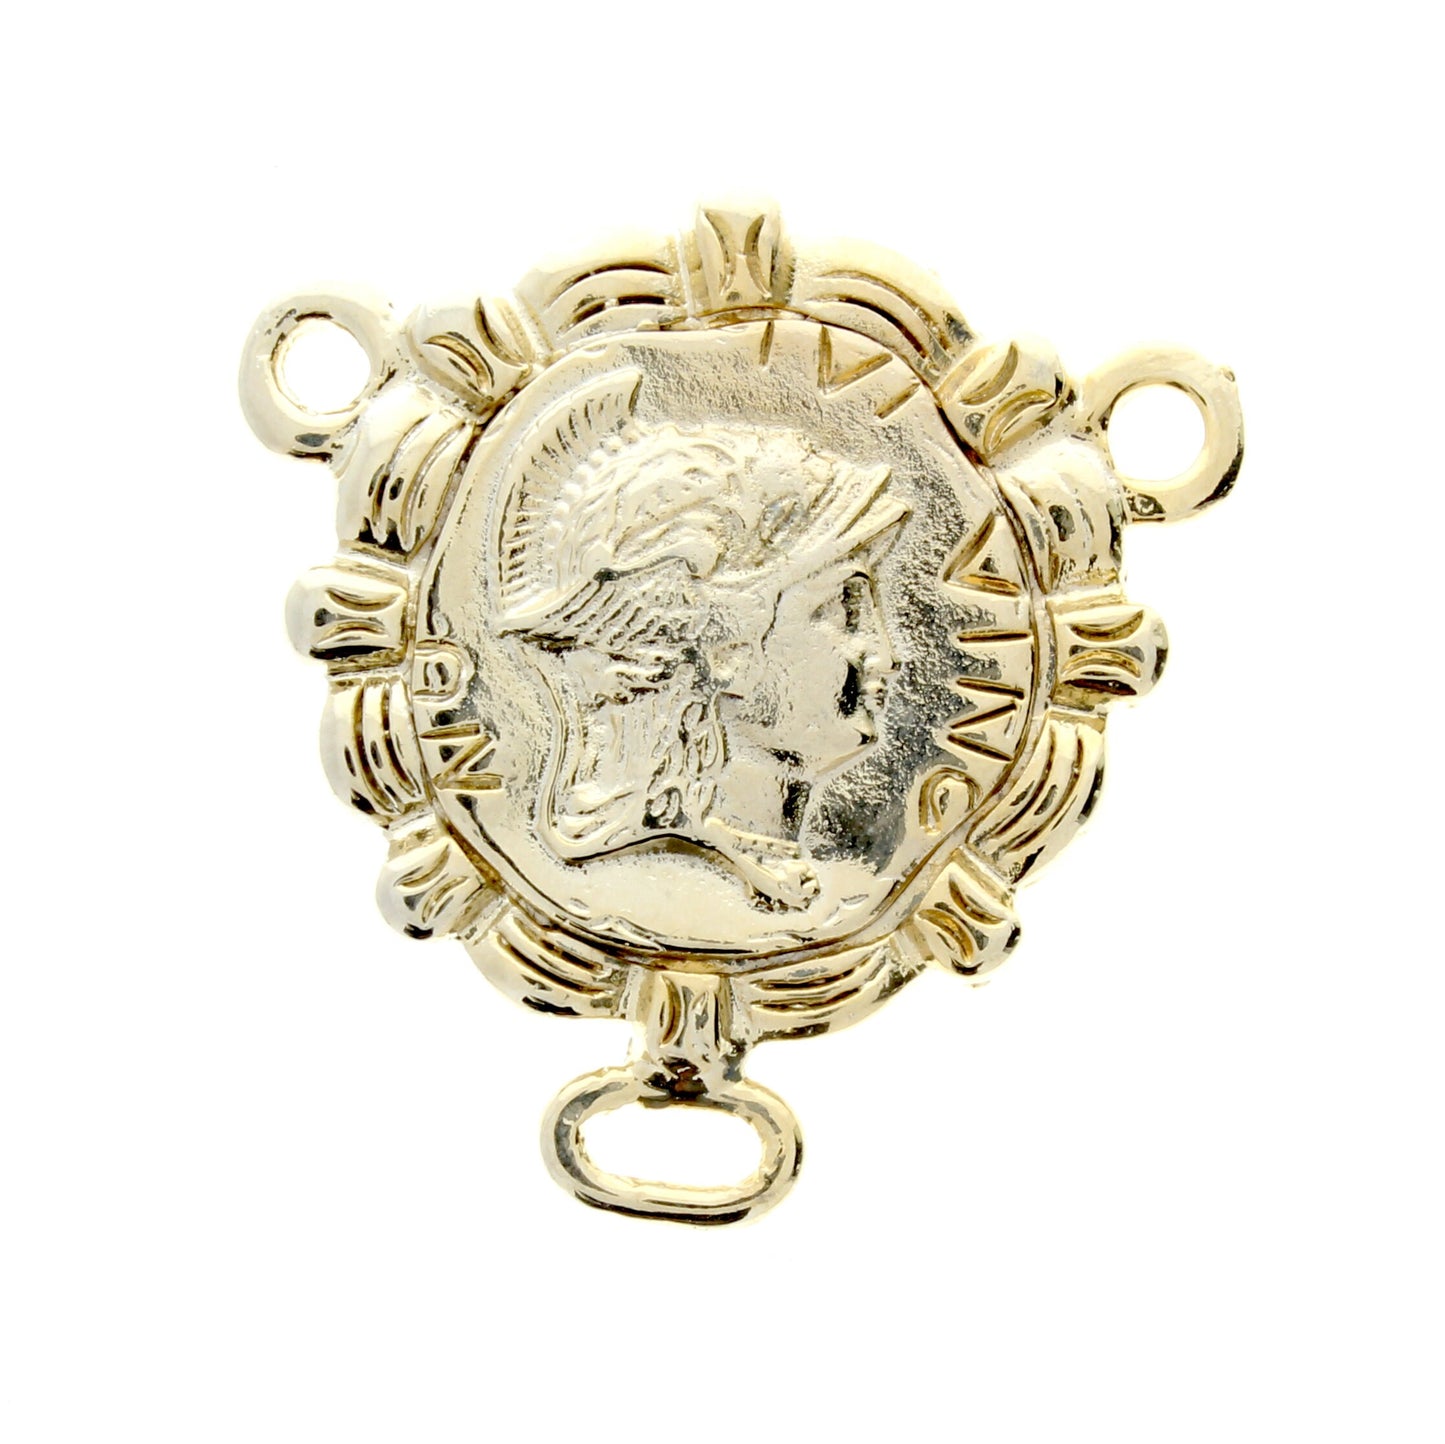 44mm Greek Roman Coin Medallion Pendant, 3 bail rings, Hamilton Gold, antique gold, or silver, Made in USA, pack of 2